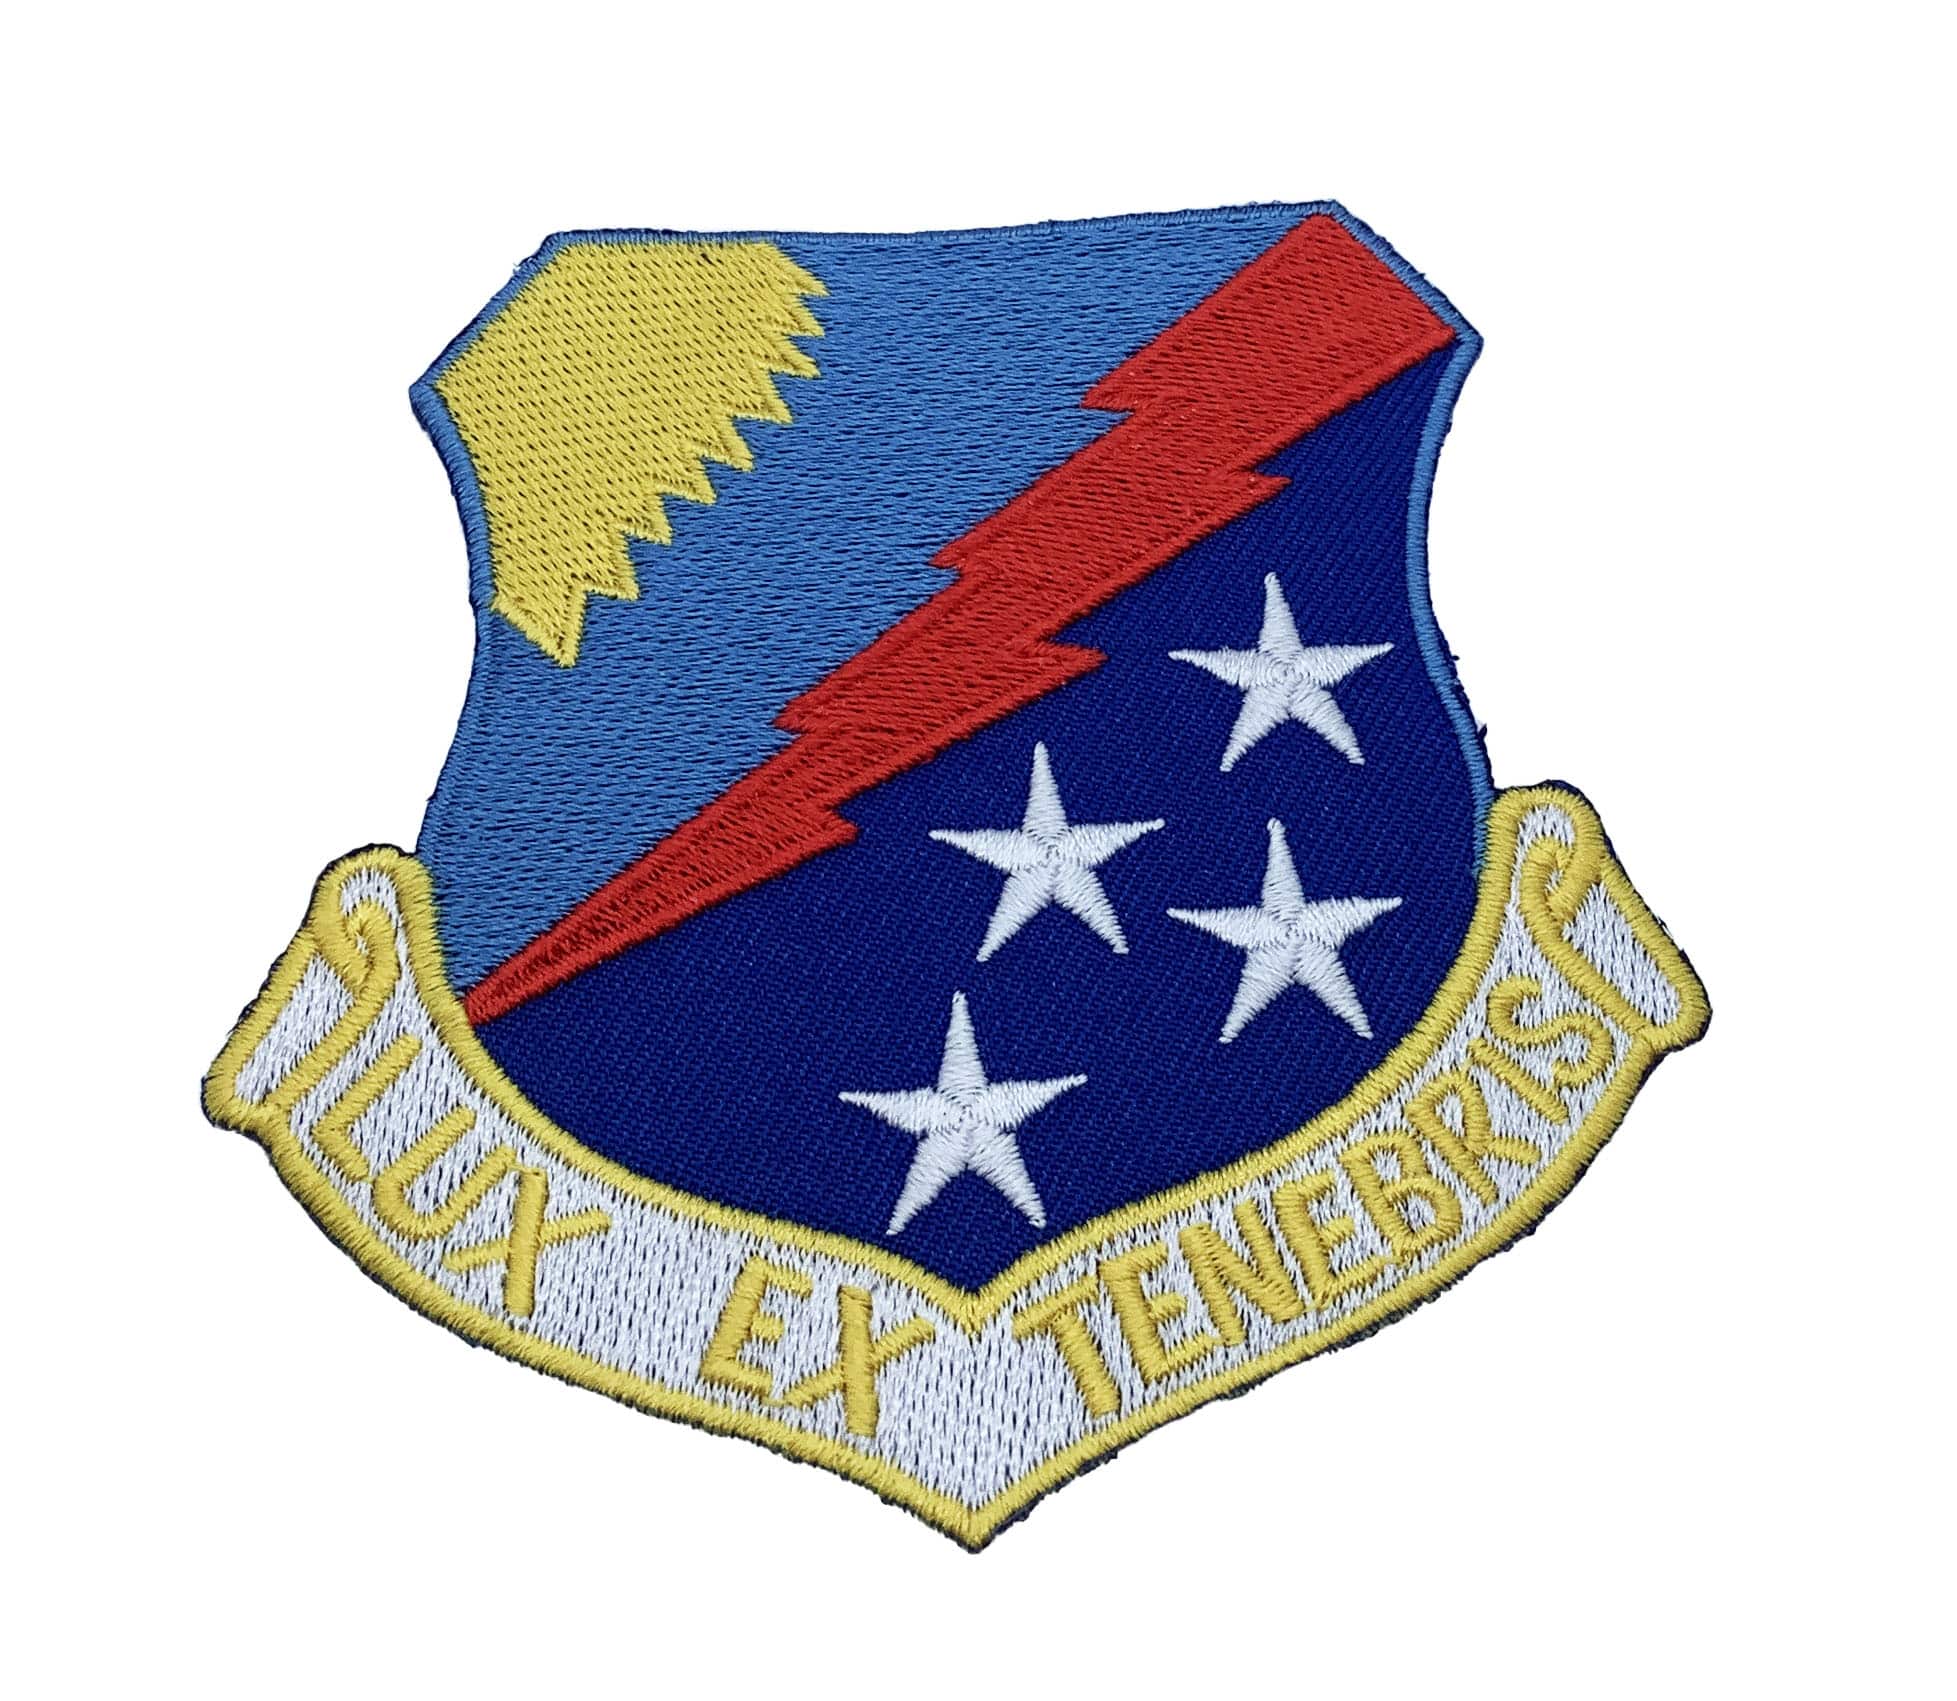 67th Tactical Reconnaissance Wing Patch – With hook and loop